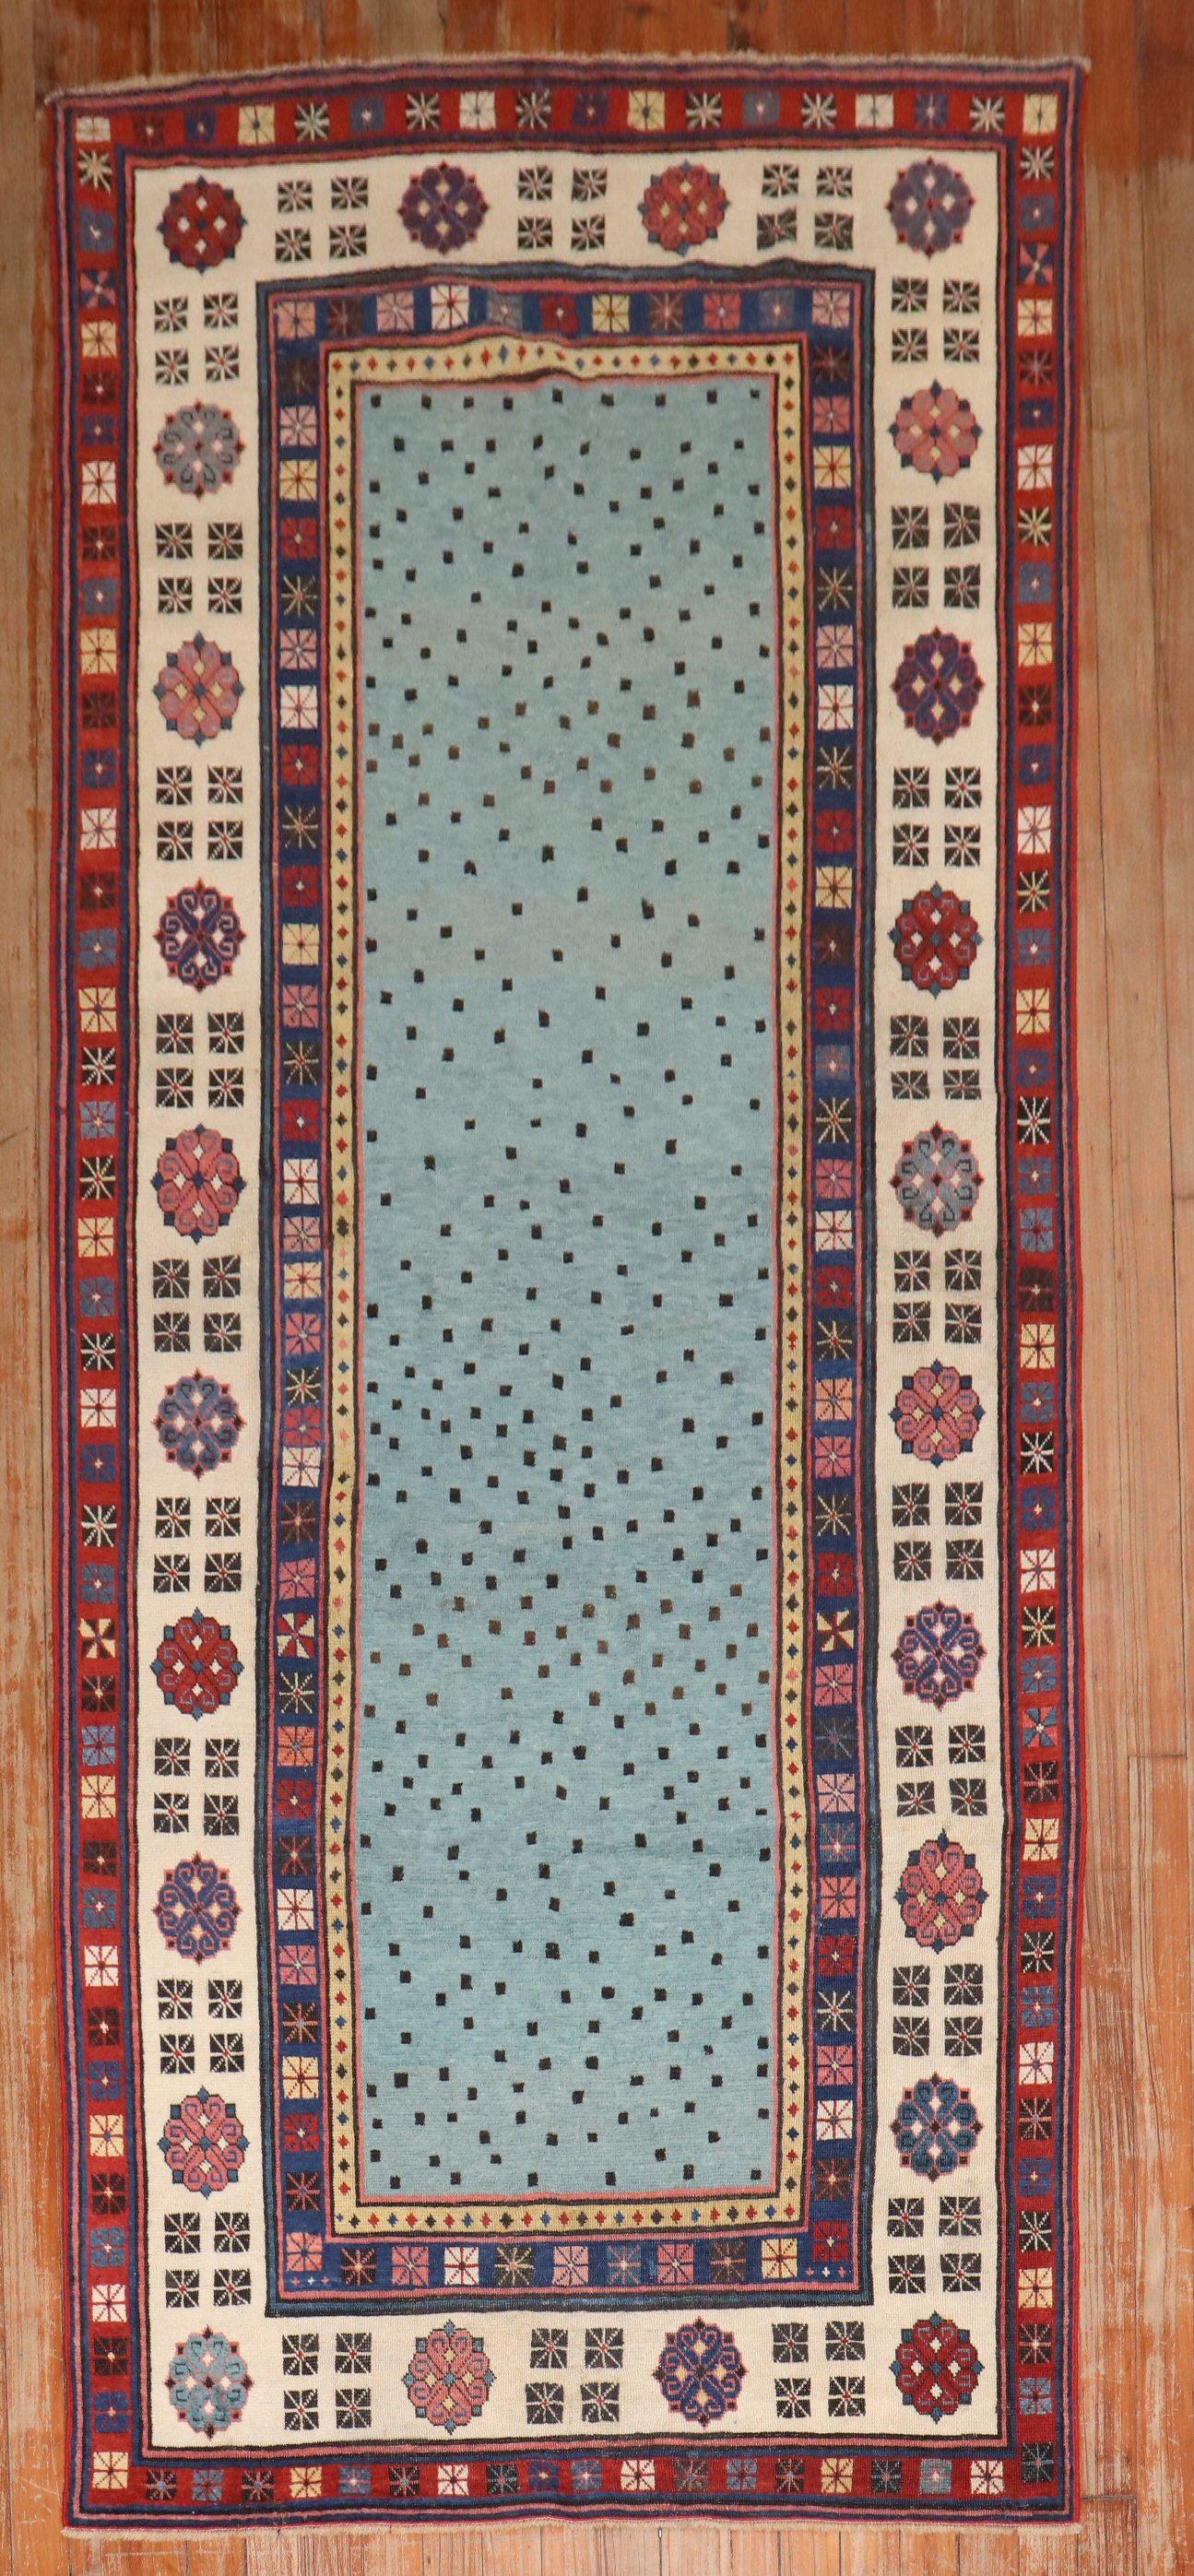 A late 19th-century Caucasian high decorative Talish Runner

Measures: 3'3